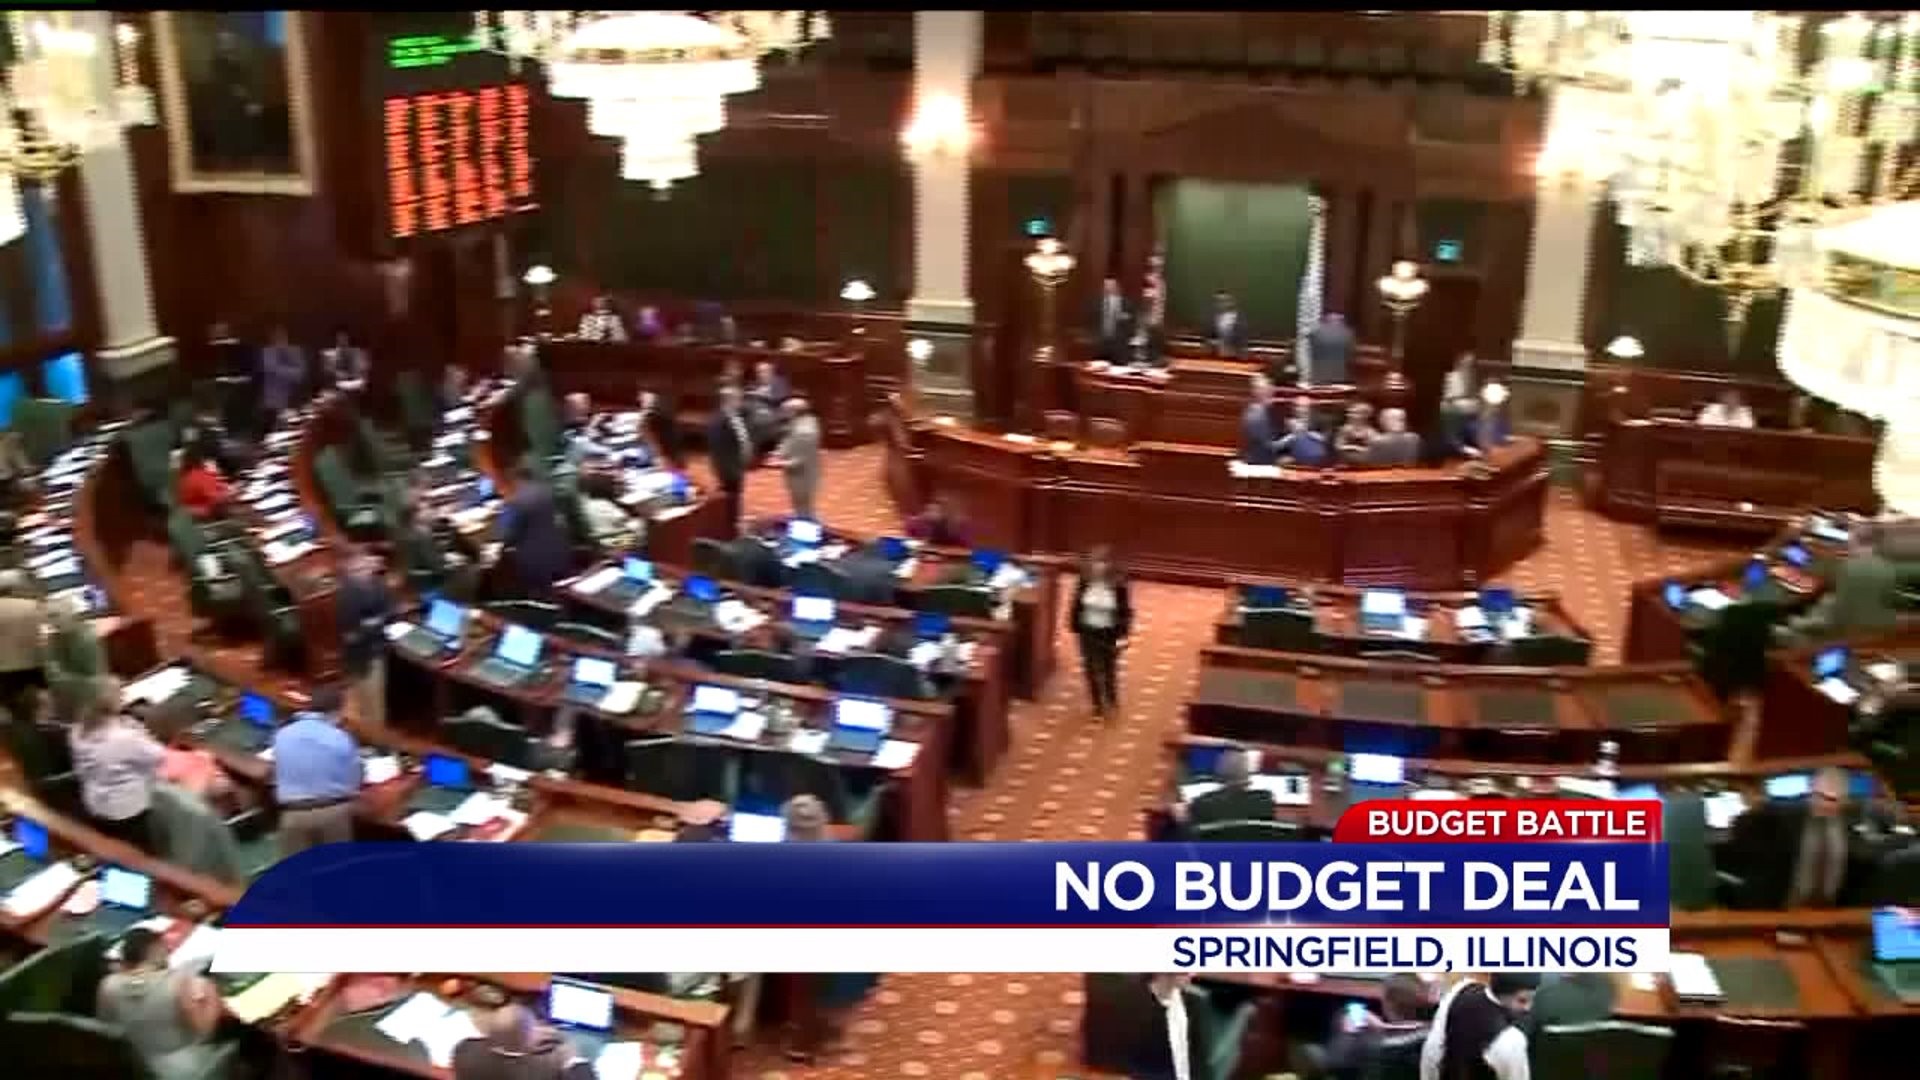 No budget deal in Illinois